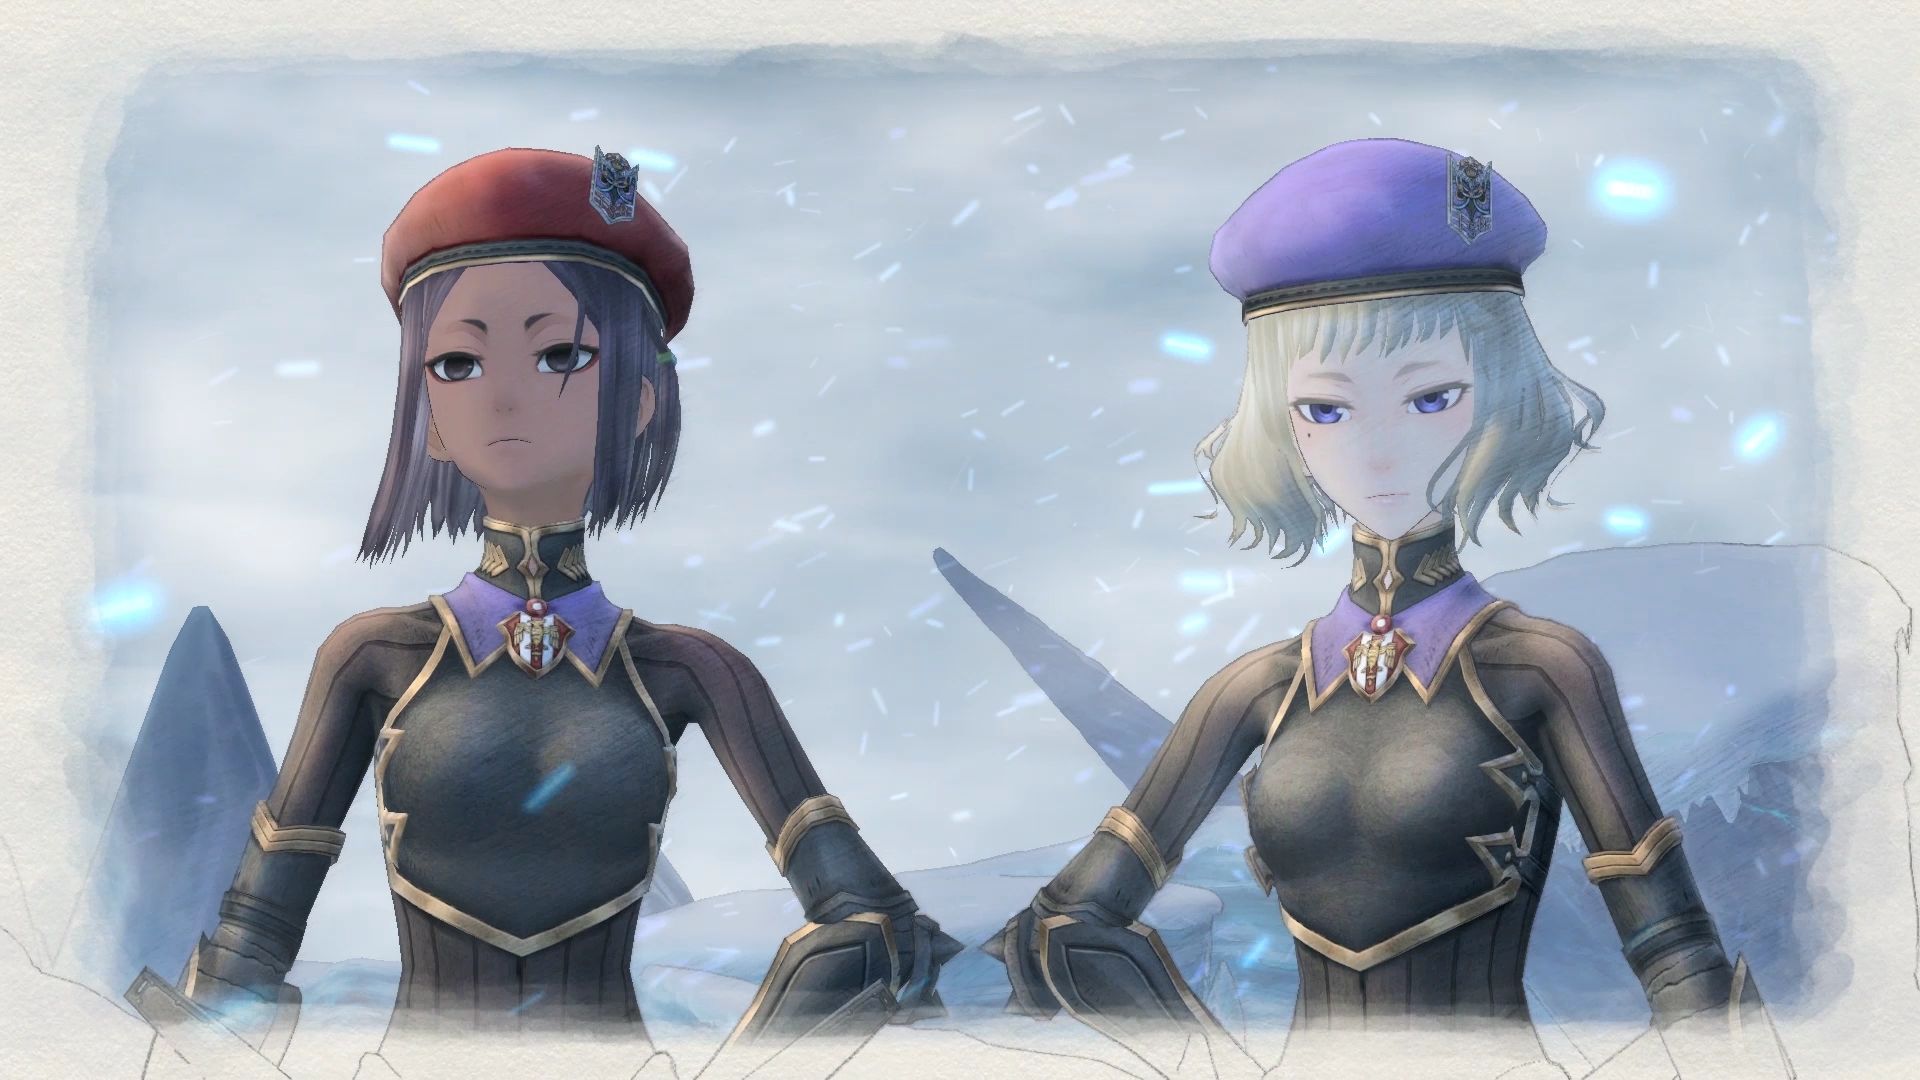 http://www.perfectly-nintendo.com/wp-content/gallery/valkyria-chronicles-4-27-12-2017/15.jpg